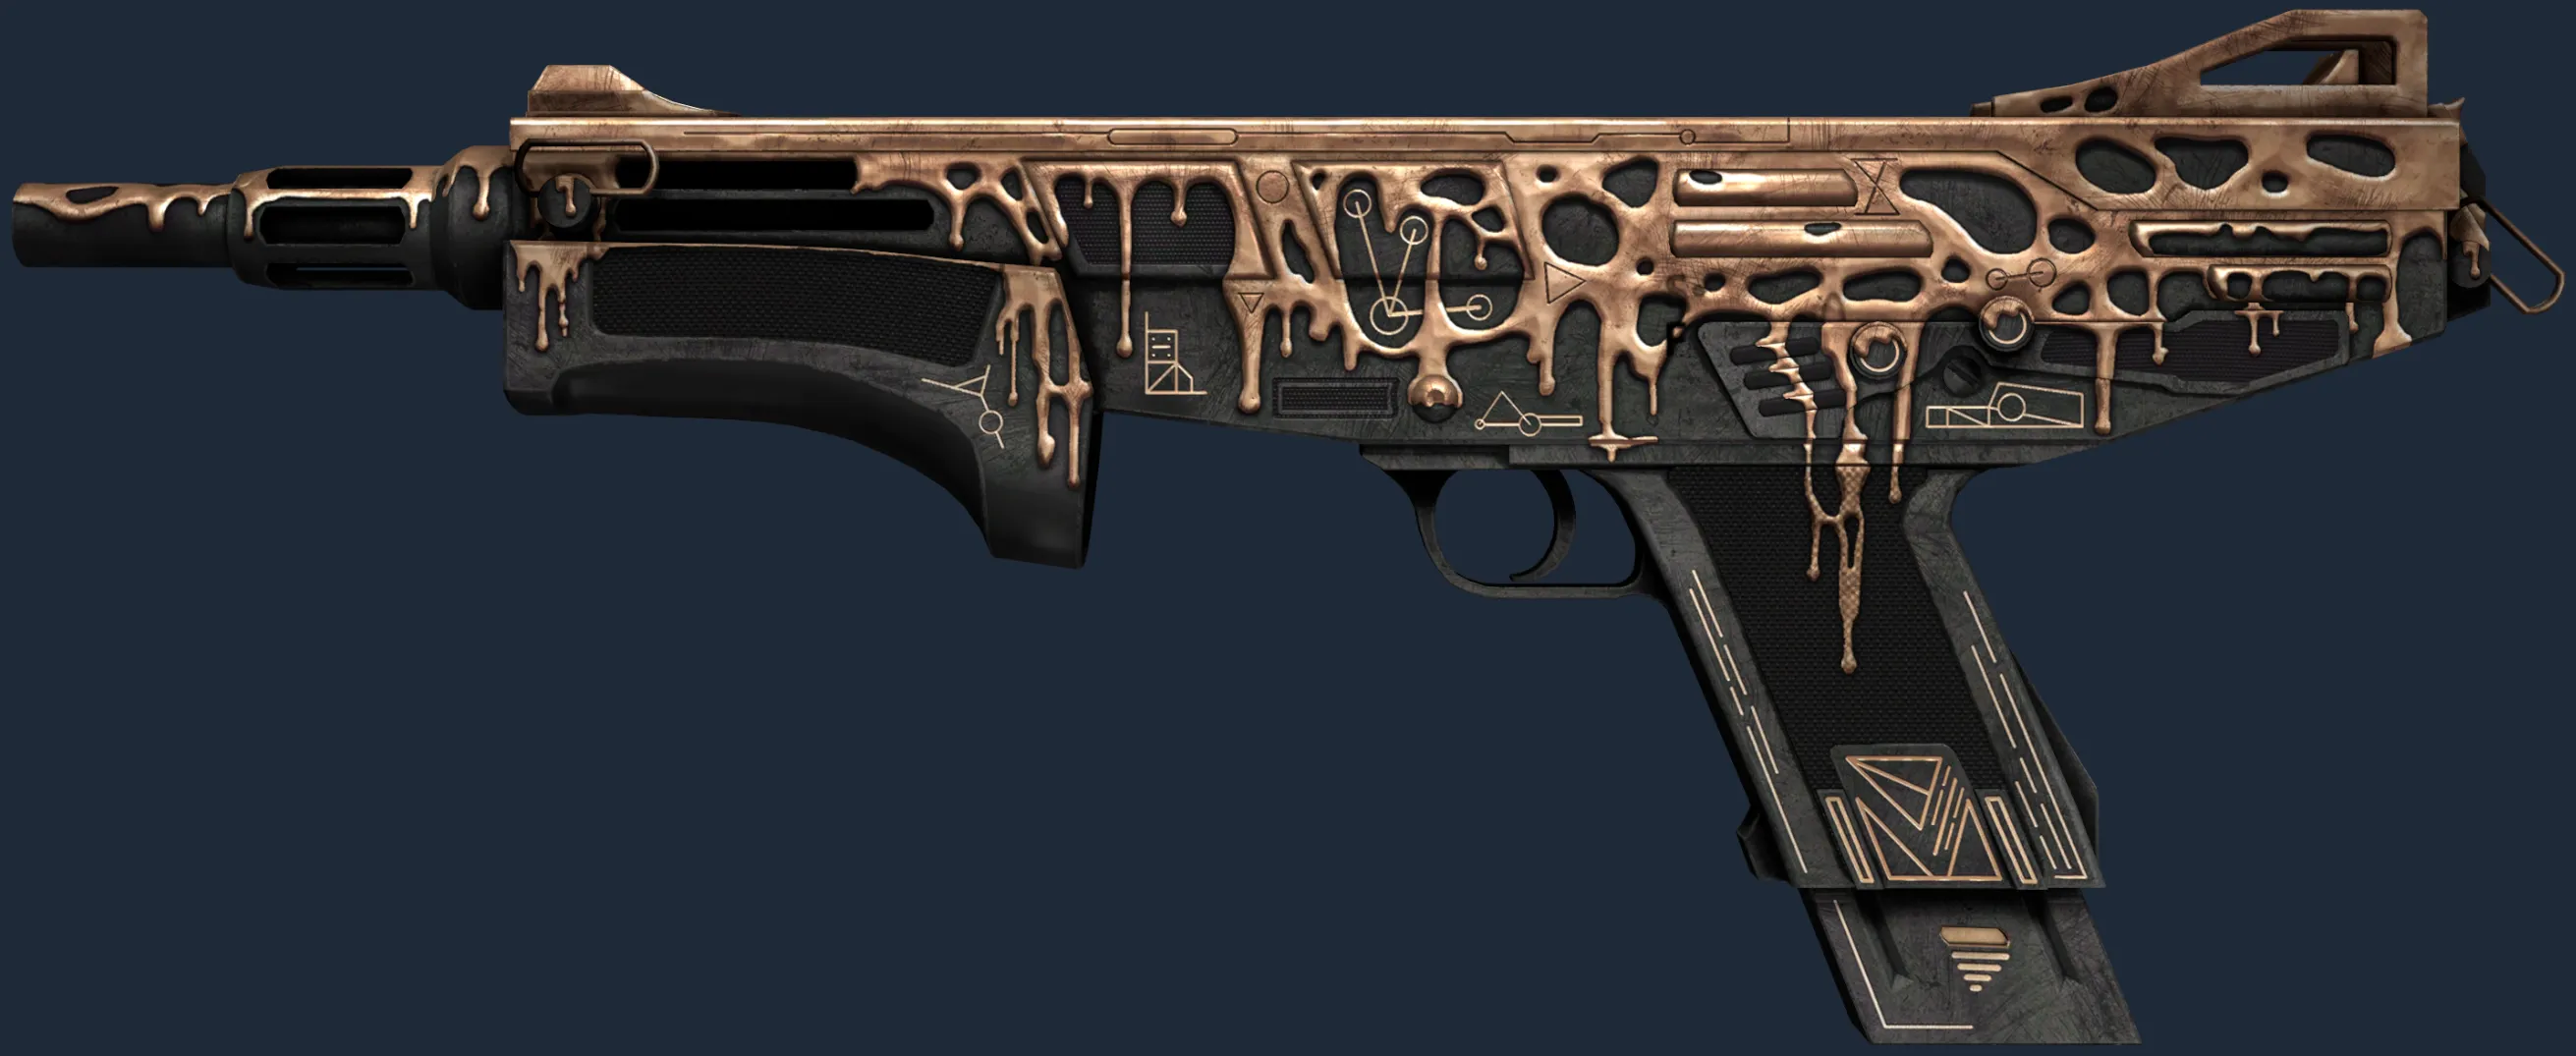 MAG-7 | Copper Coated (Minimal Wear)